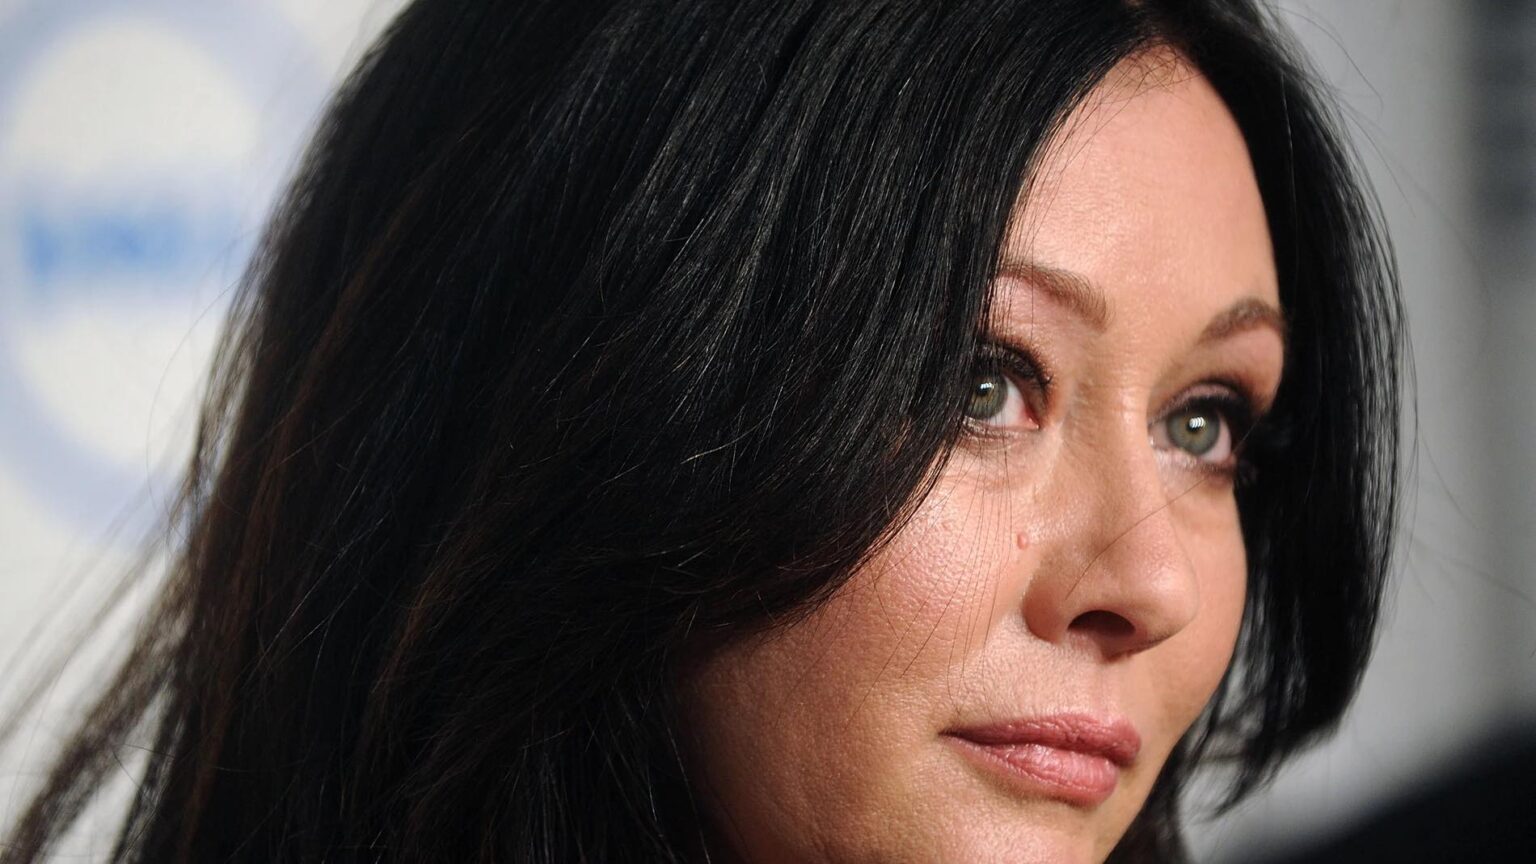 Uncover the latest on Shannen Doherty's cancer prognosis and the truth behind the alleged nude scandal. Candid insights and surprising revelations await.